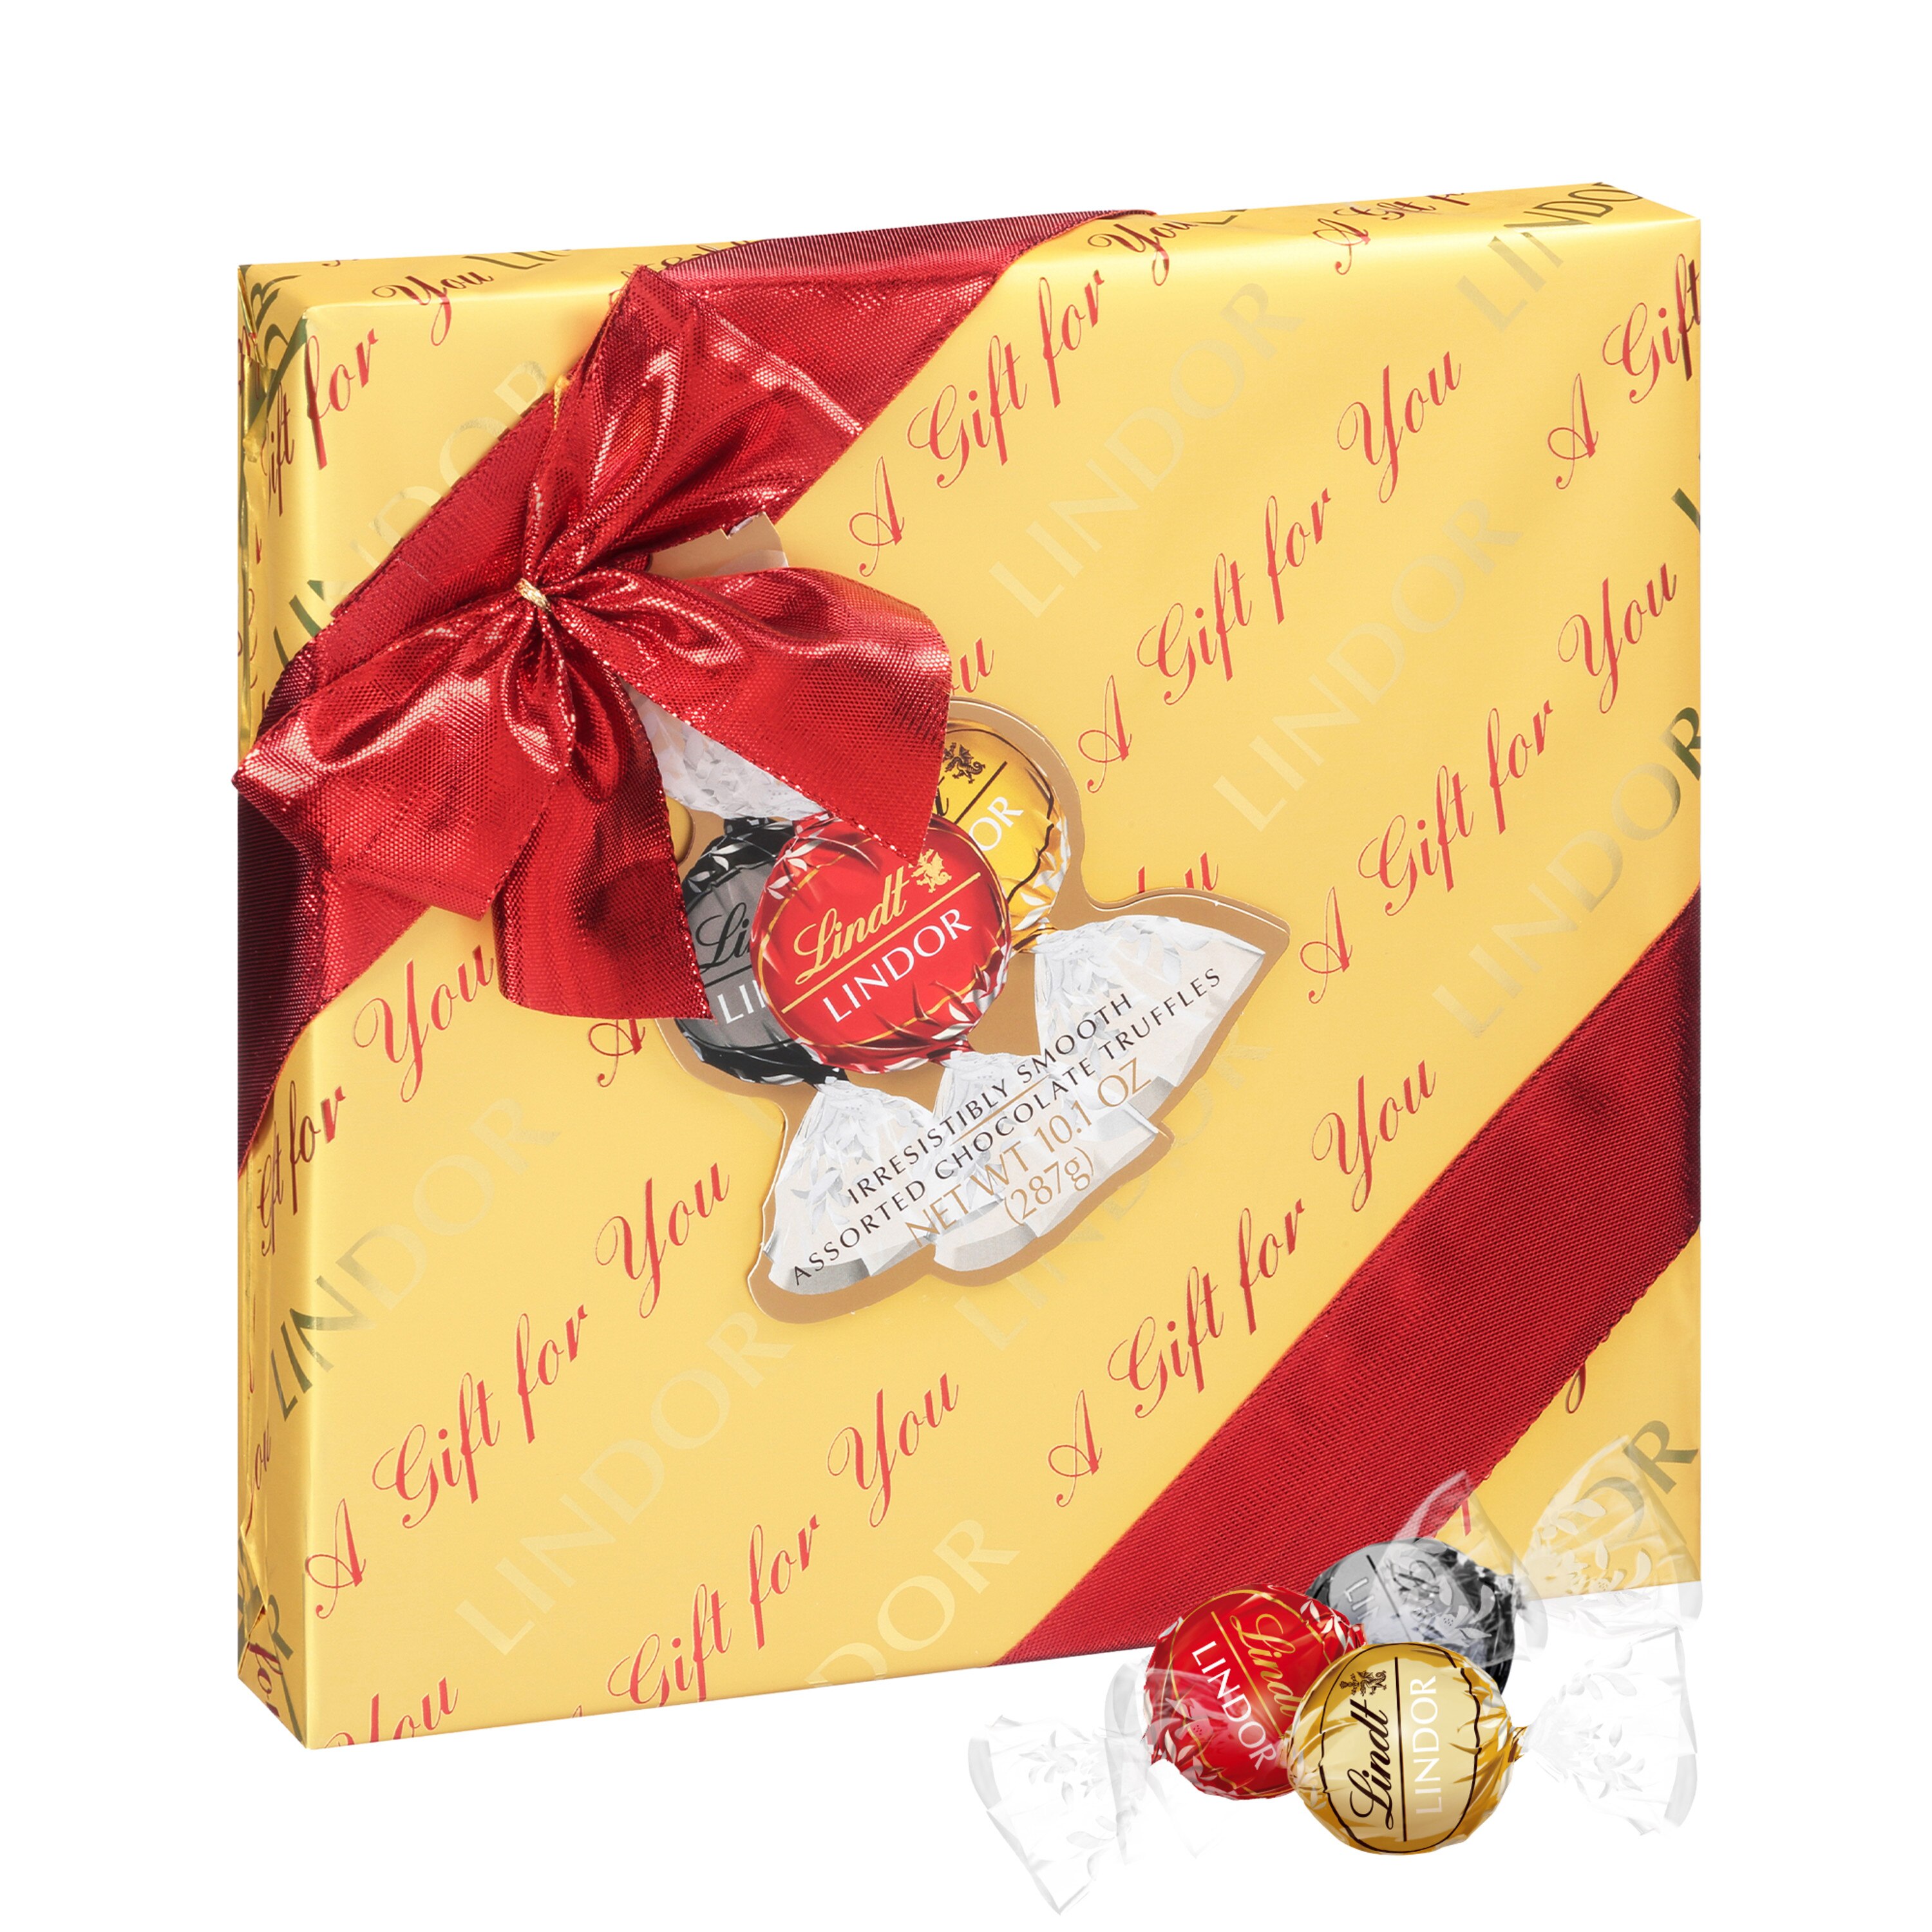 Lindt LINDOR Holiday Assorted Chocolate Truffles Gift Box, Assorted Chocolates with Smooth, Melting Truffle Center, 10.1 oz.